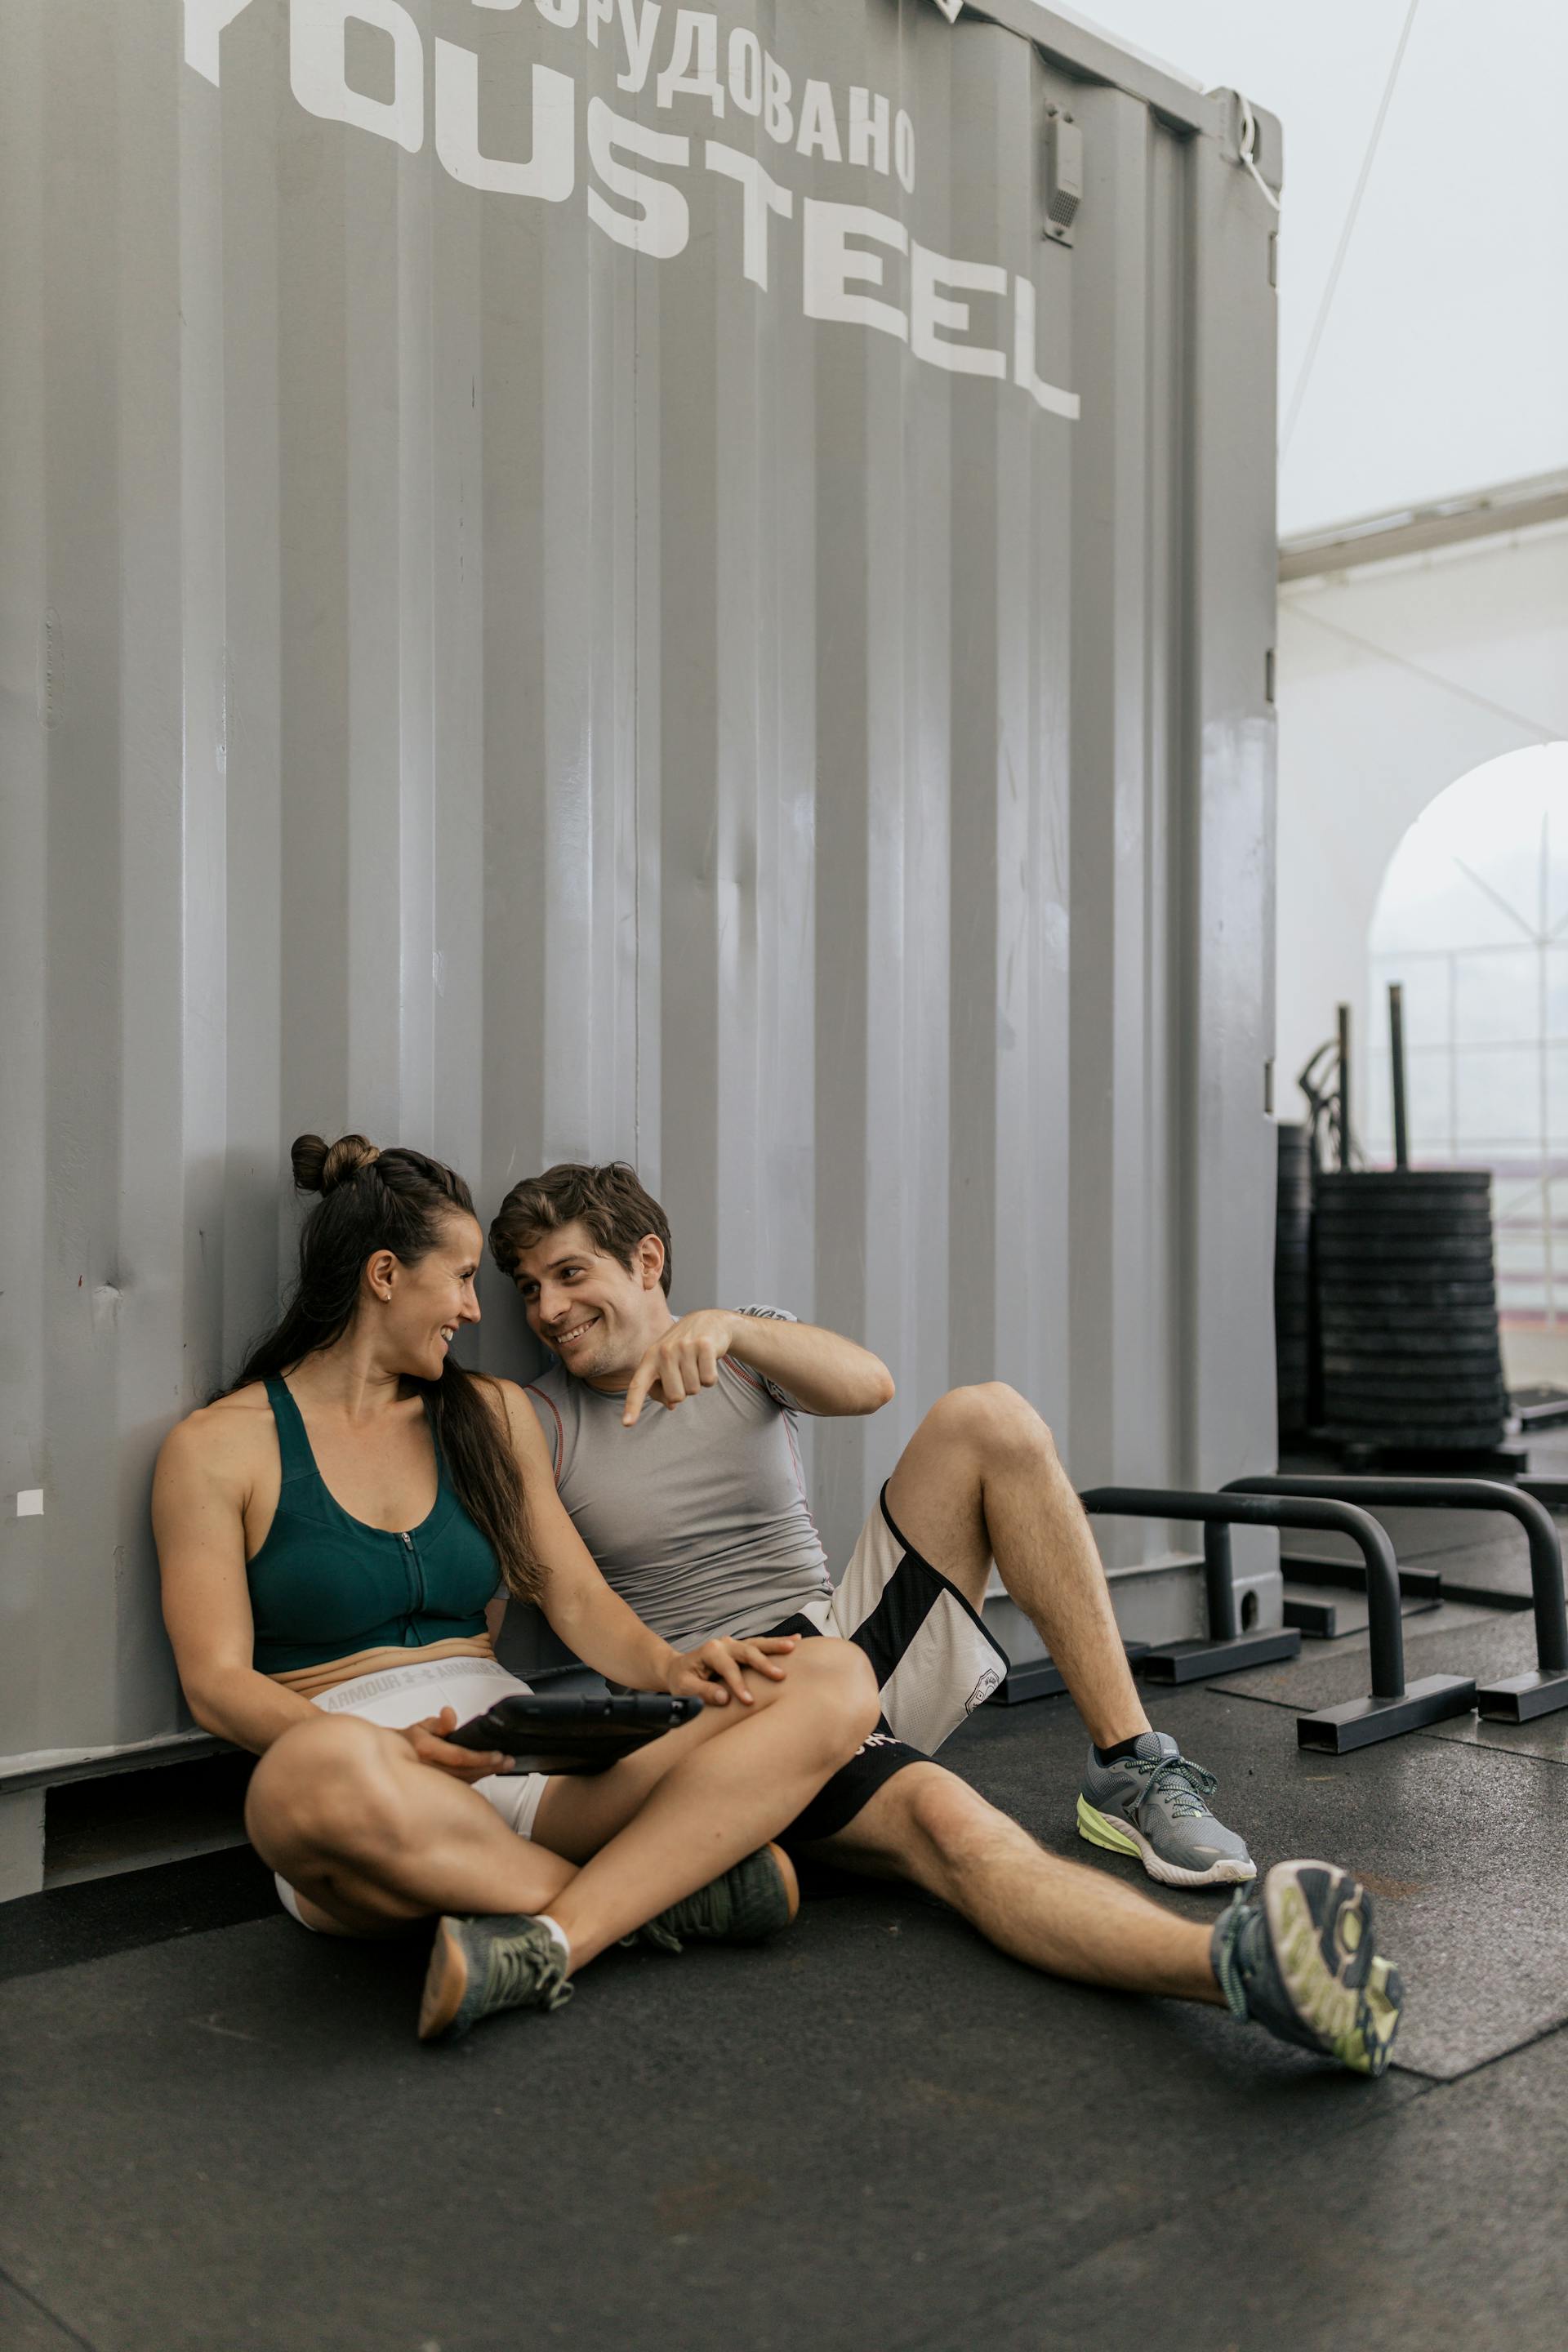 Couple in athletic gear sitting on the floor and chatting | Source: Pexels